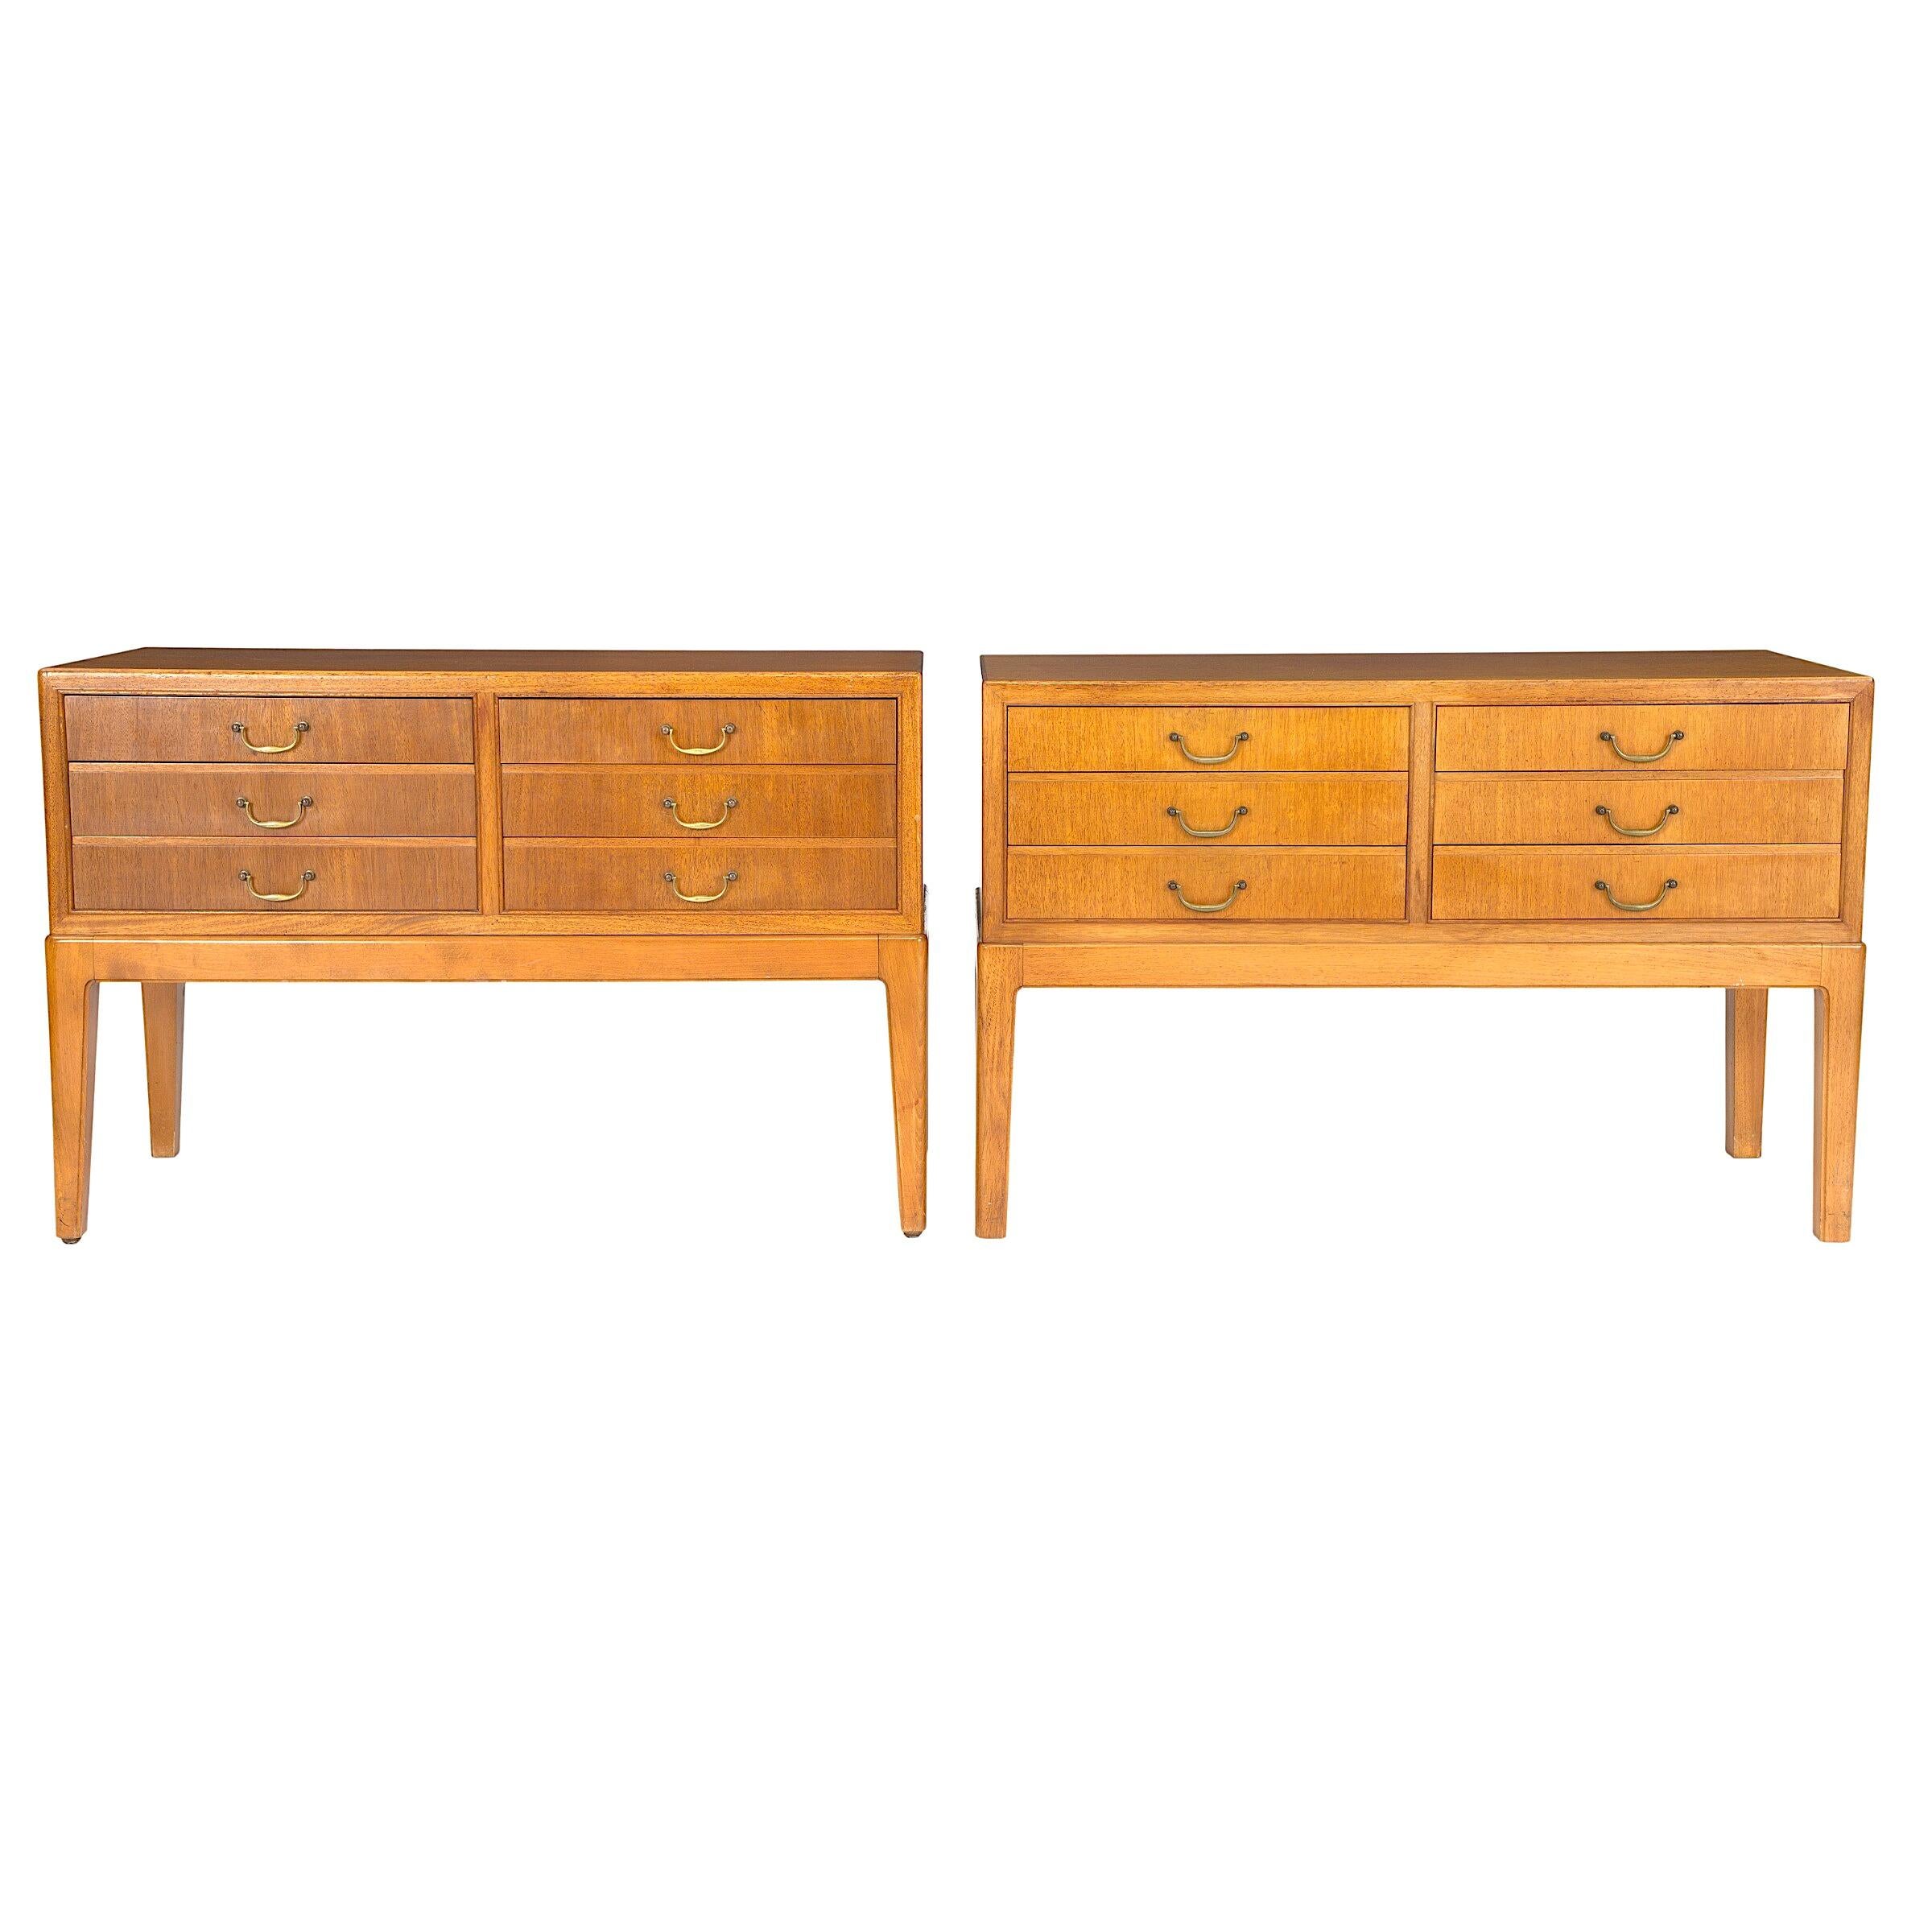 A neoclassical pair of sideboards by a Danish cabinetmaker, in mahogany. 6 drawers each for 
storing cutlery, linens, etc. Metal handles for easy opening.